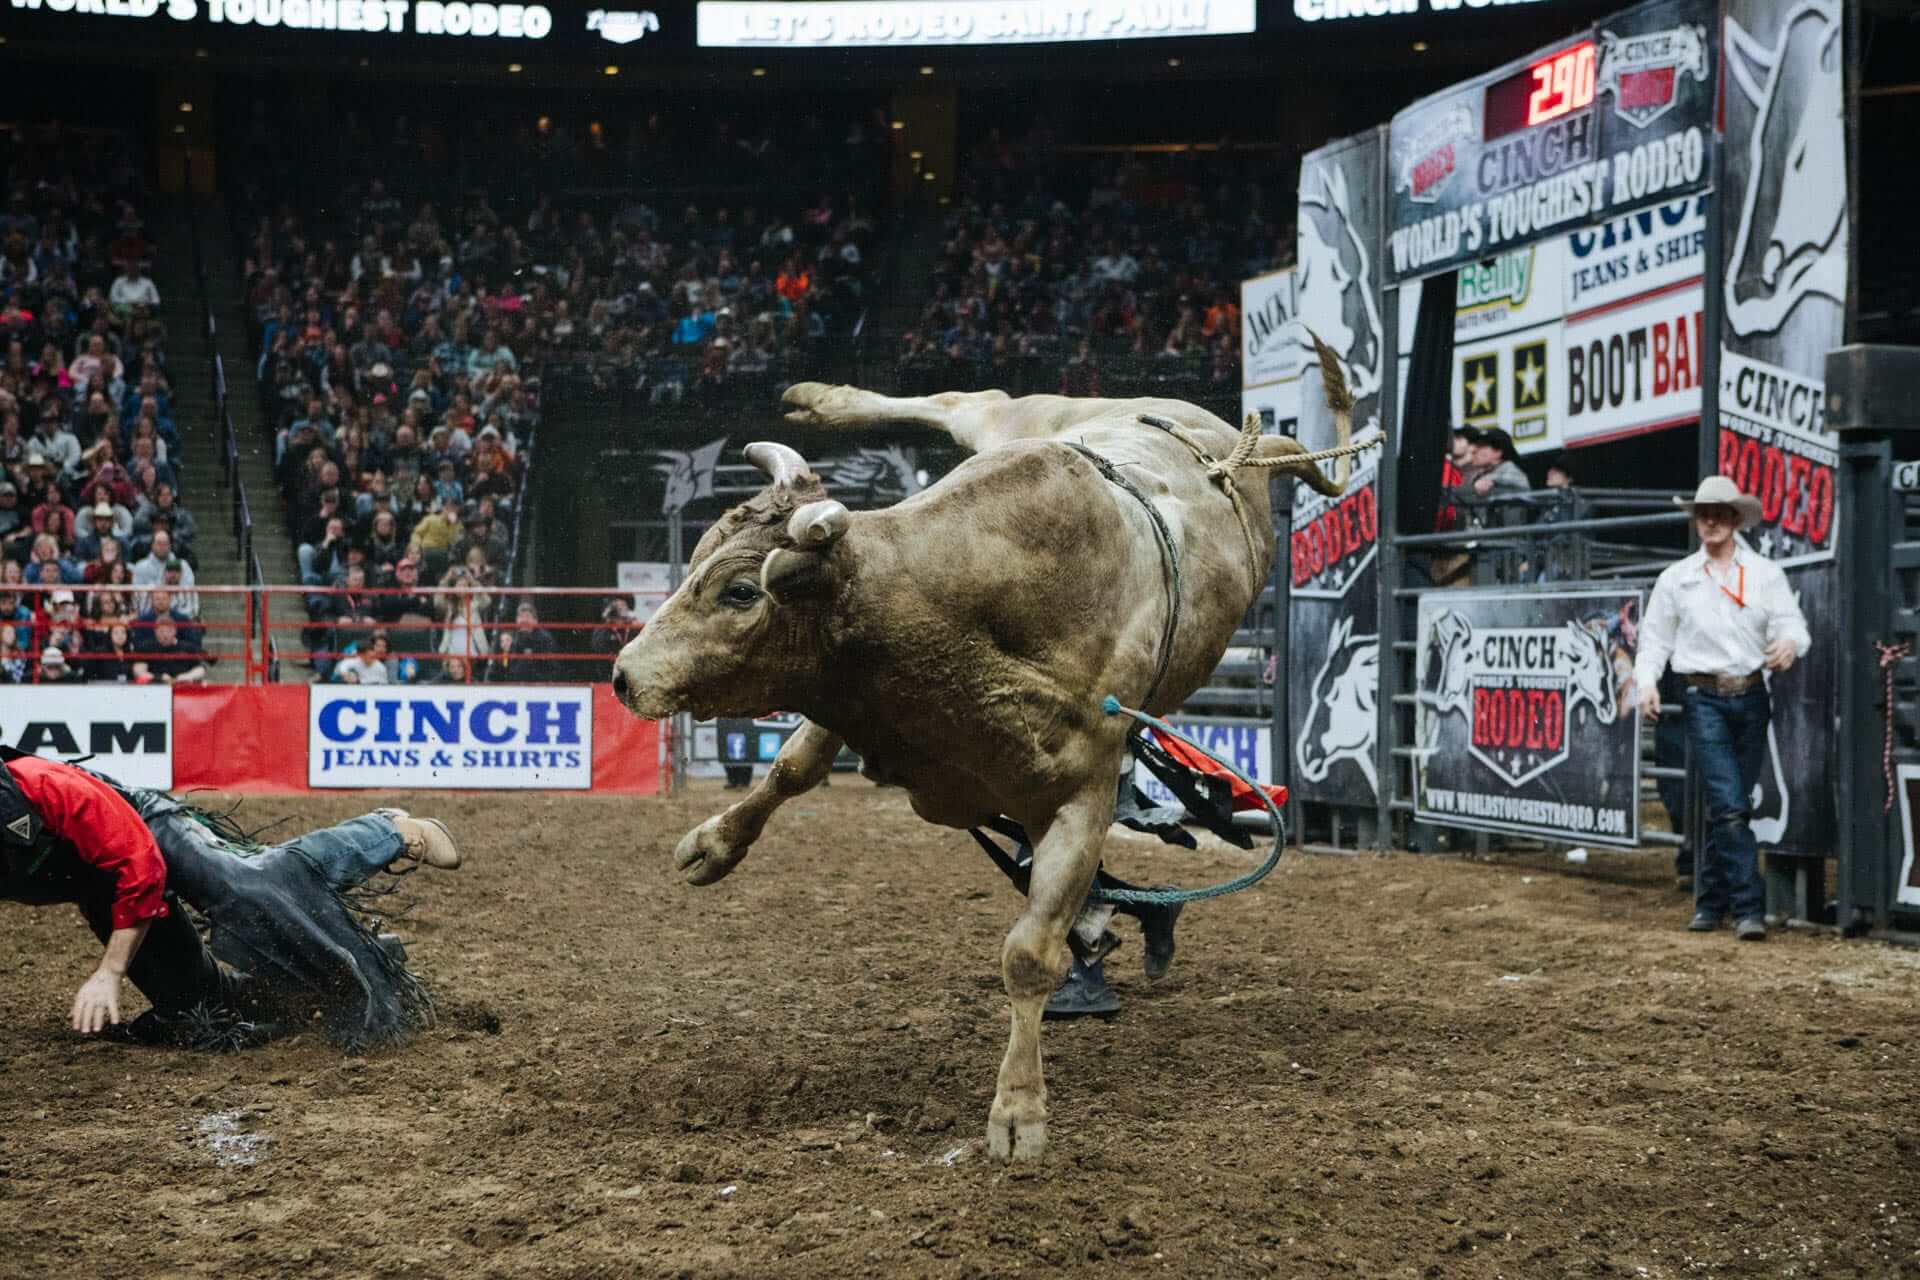 Cinch World's Toughest Rodeo, 1/1 Go Country Events